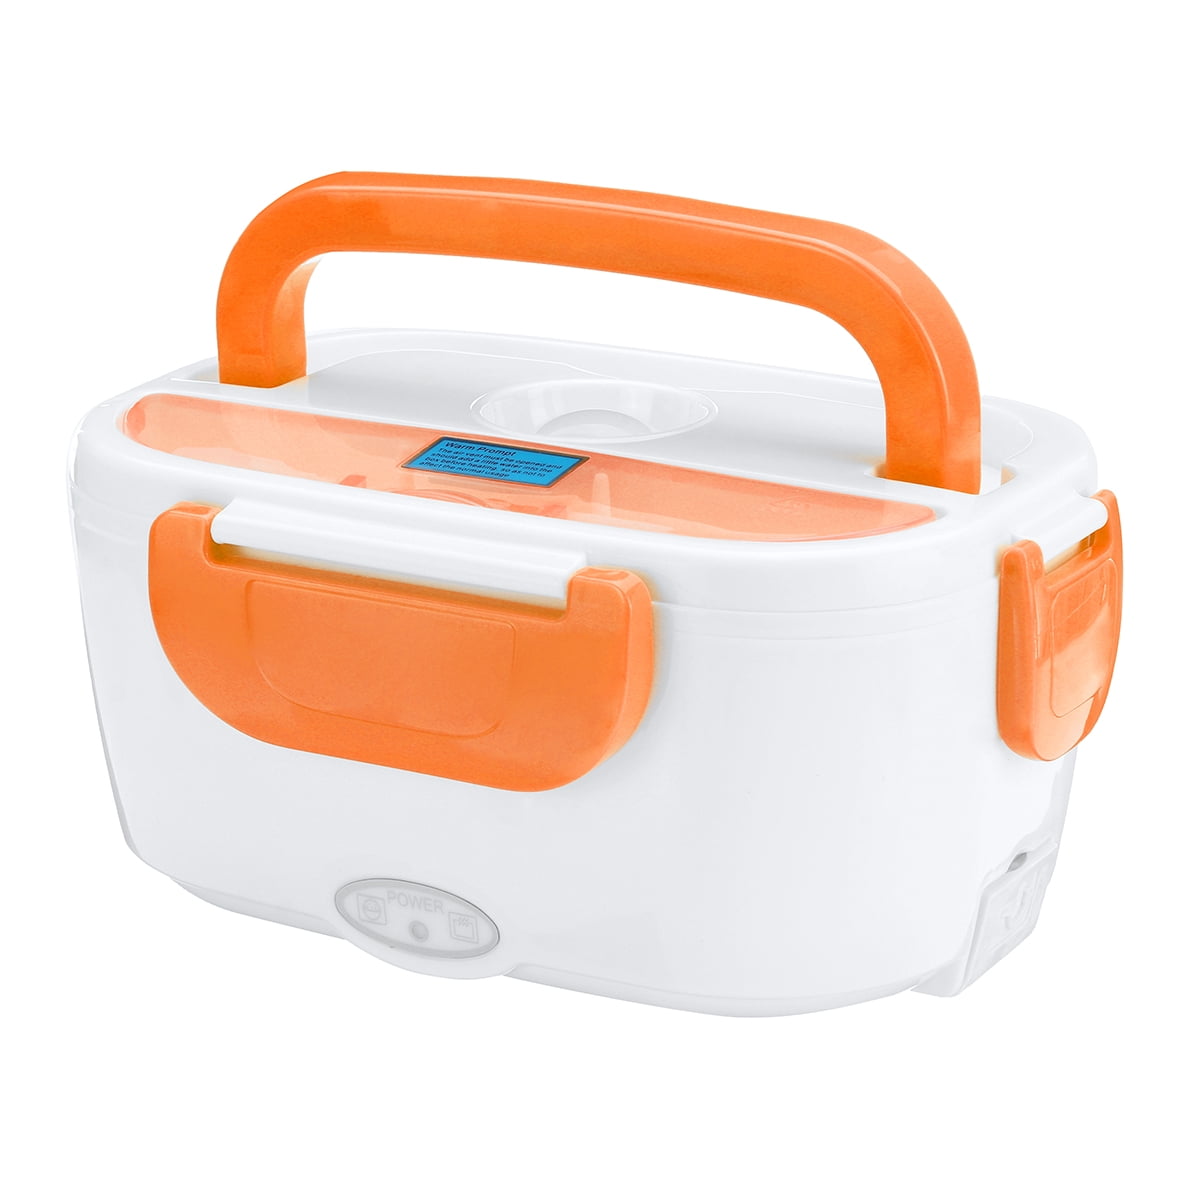 2 in 1 Portable Electric Heated Lunch Box Car Home Auto Food Rice Container Warm 